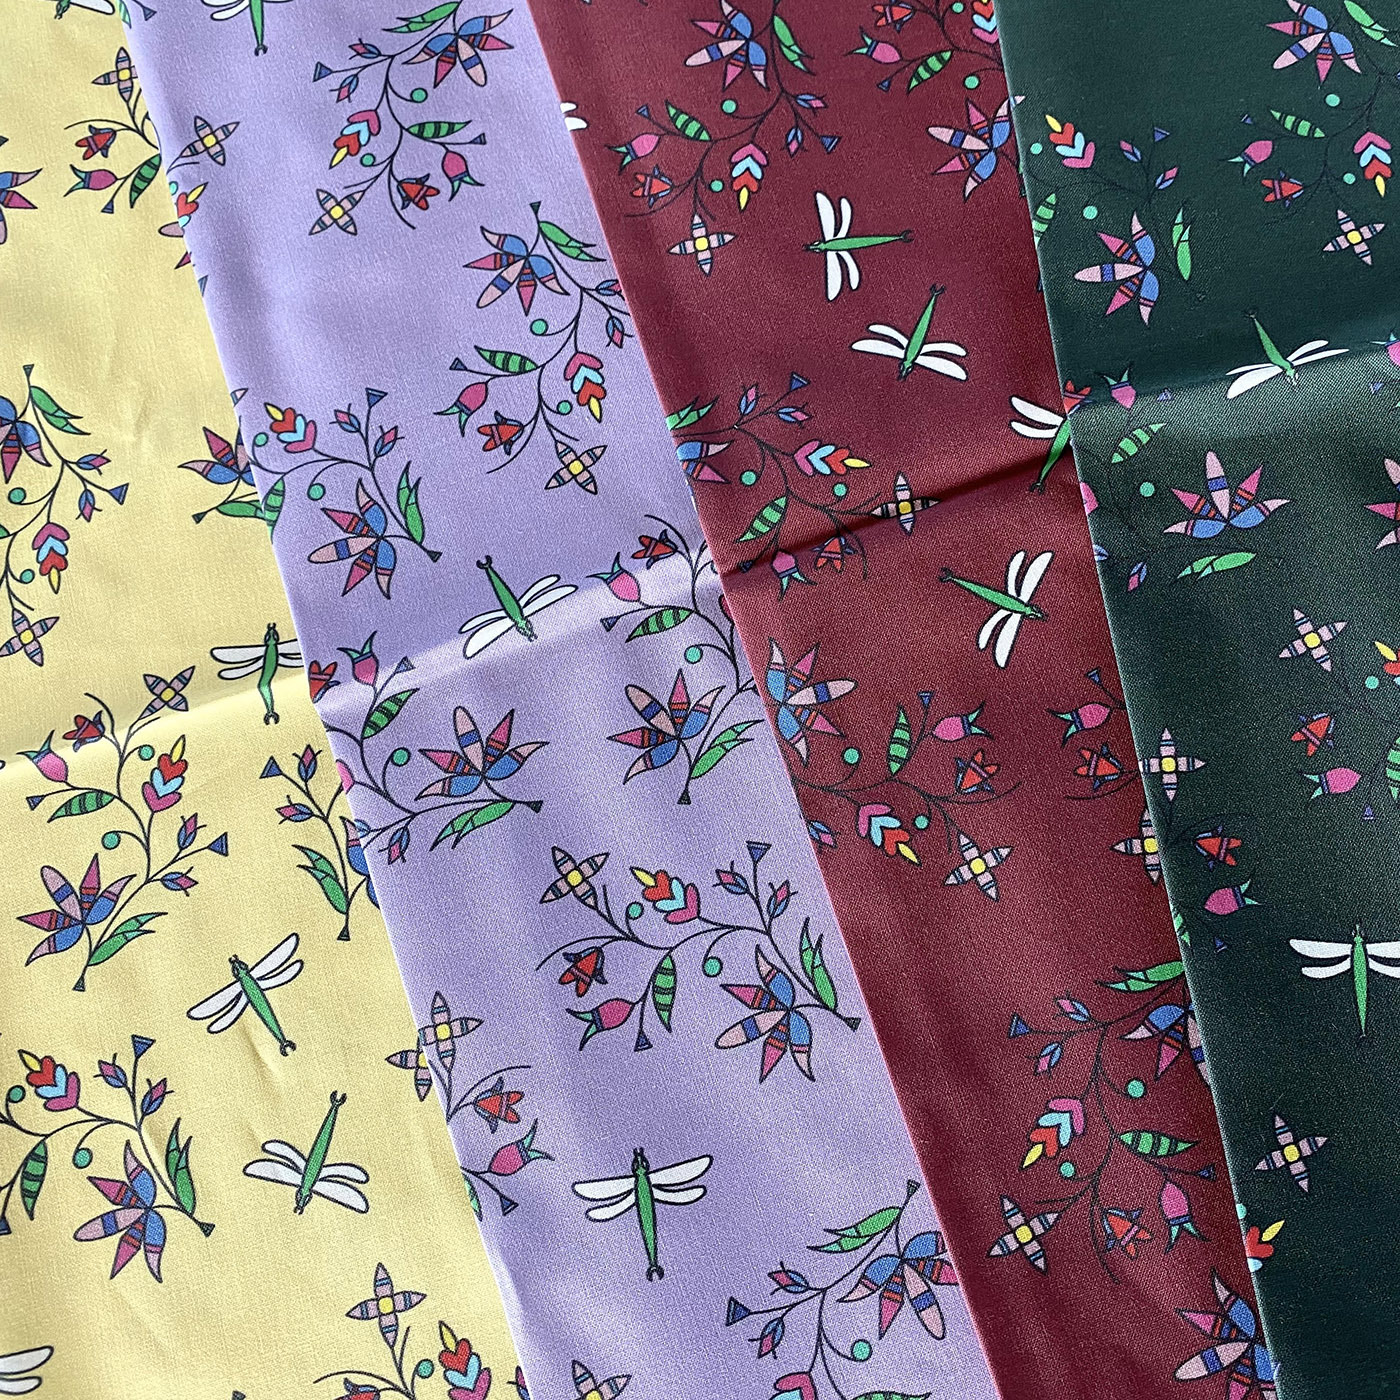 Cole Redhorse Johnson's Dakota Calico design is displayed in four colors, lemon, lavender, maroon and forest green. This repeating design features dragonflies with white wings and green bodies. Small clusters of lavender, blue and maroon flowers growing on green stems with green leaves surround the dragonflies.